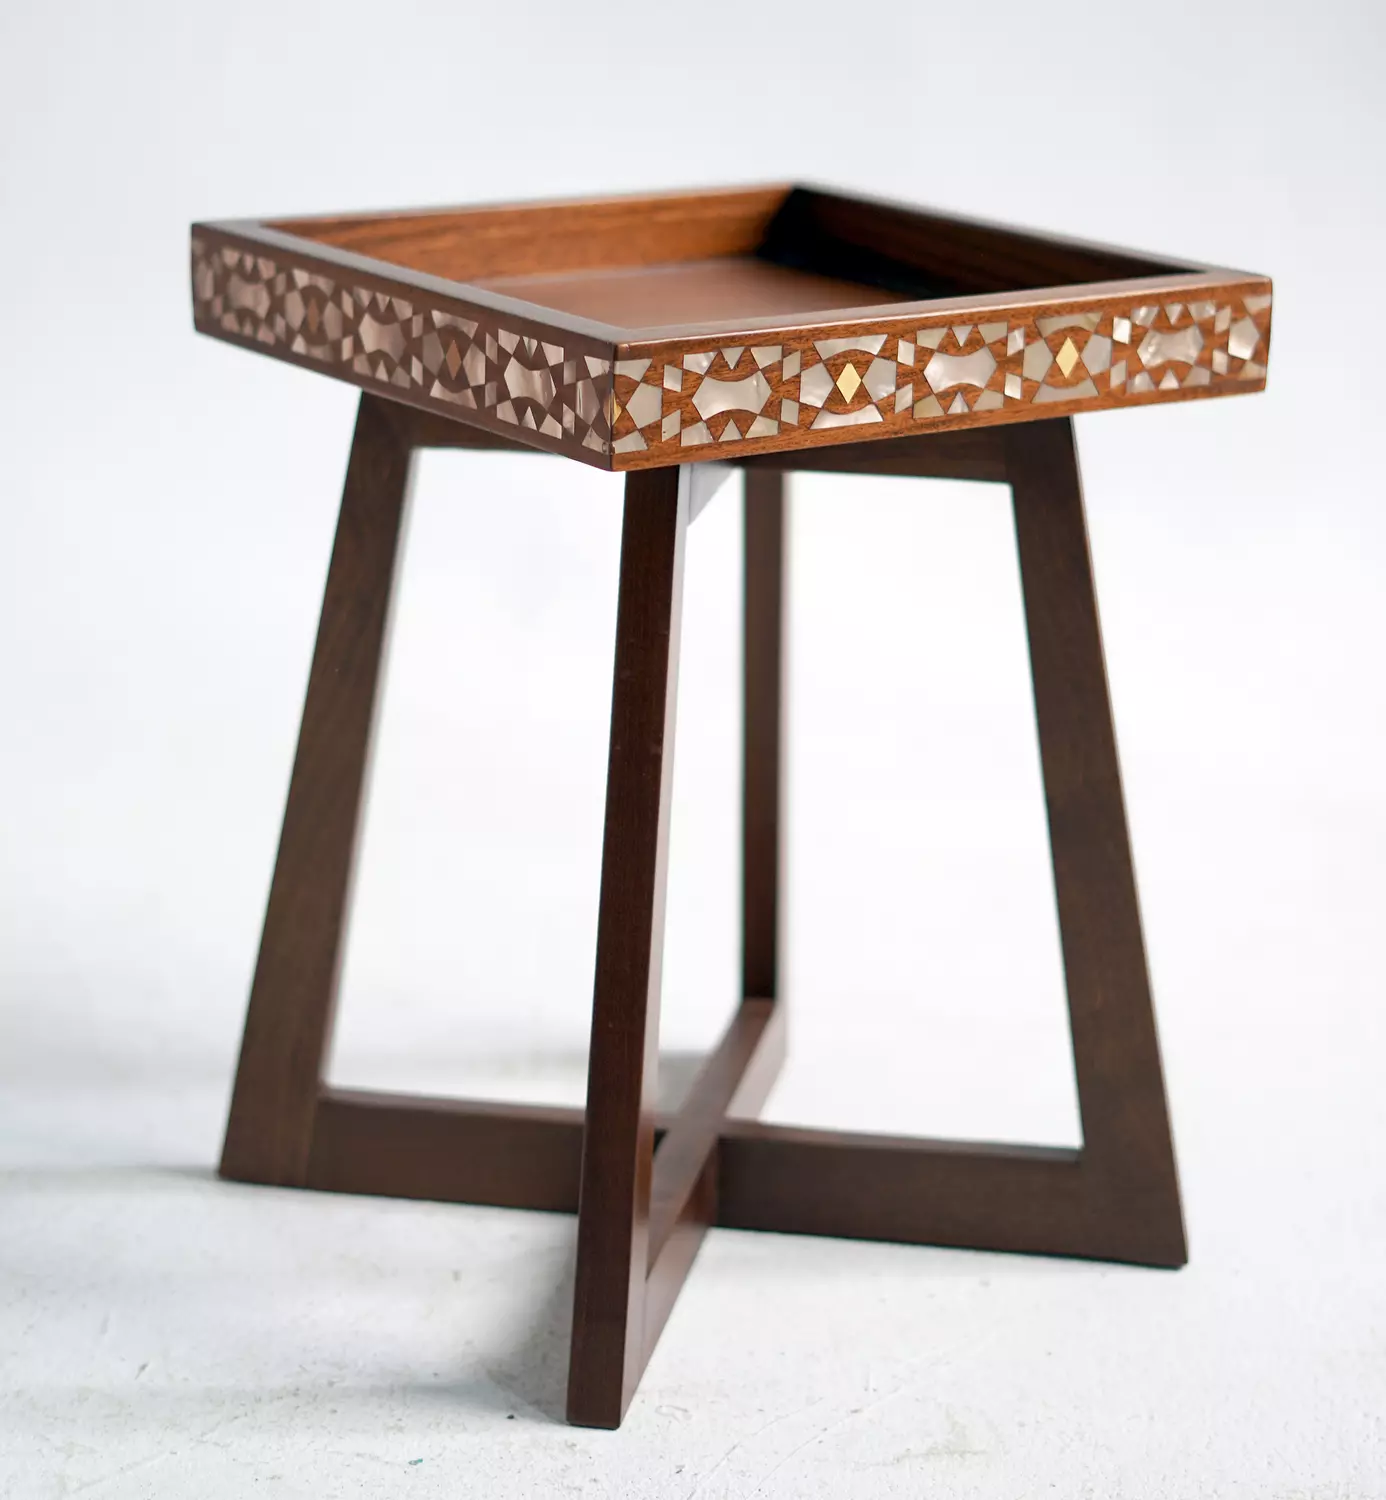 Qijmas side table 2 2